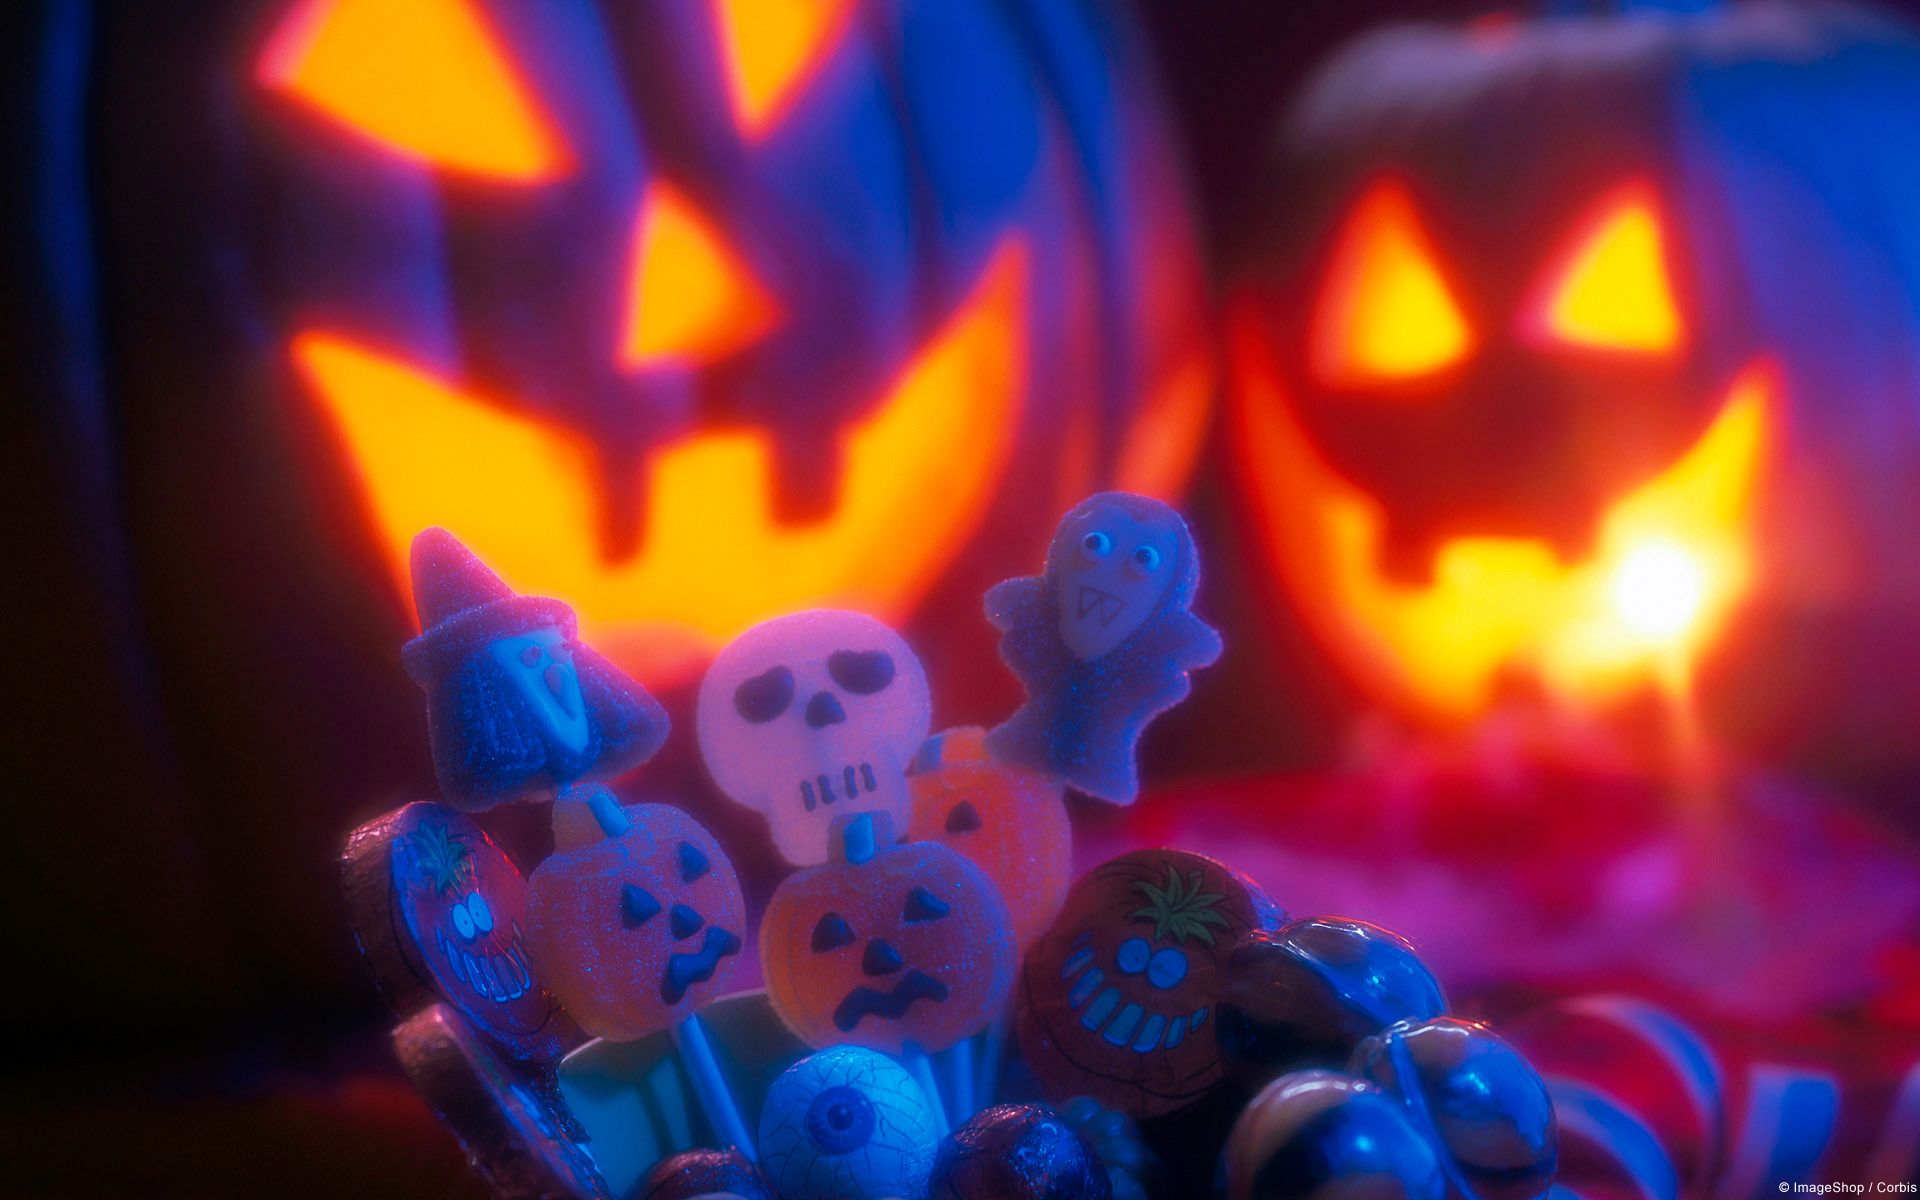 Windows Themes Decorate Your Desktop For Halloween